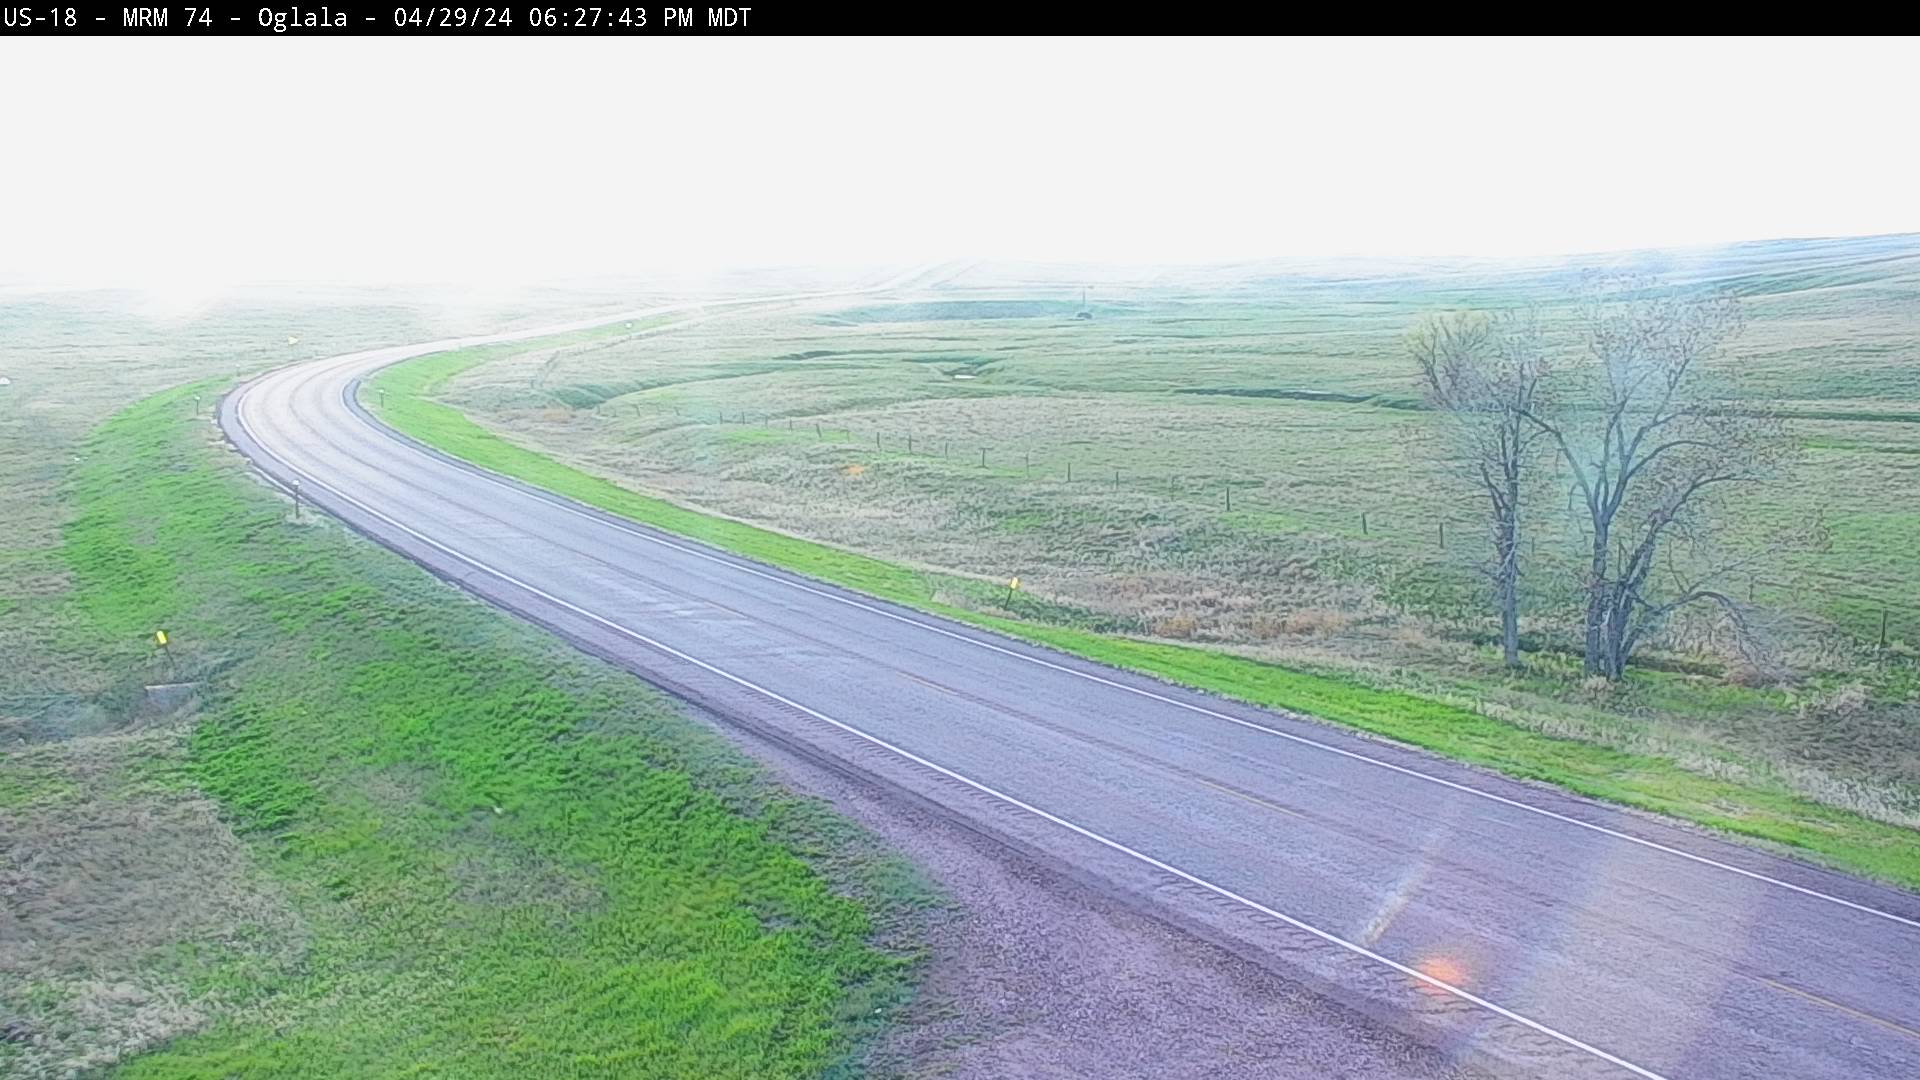 13 miles west of town US-18 @ MP 74 - West Traffic Camera